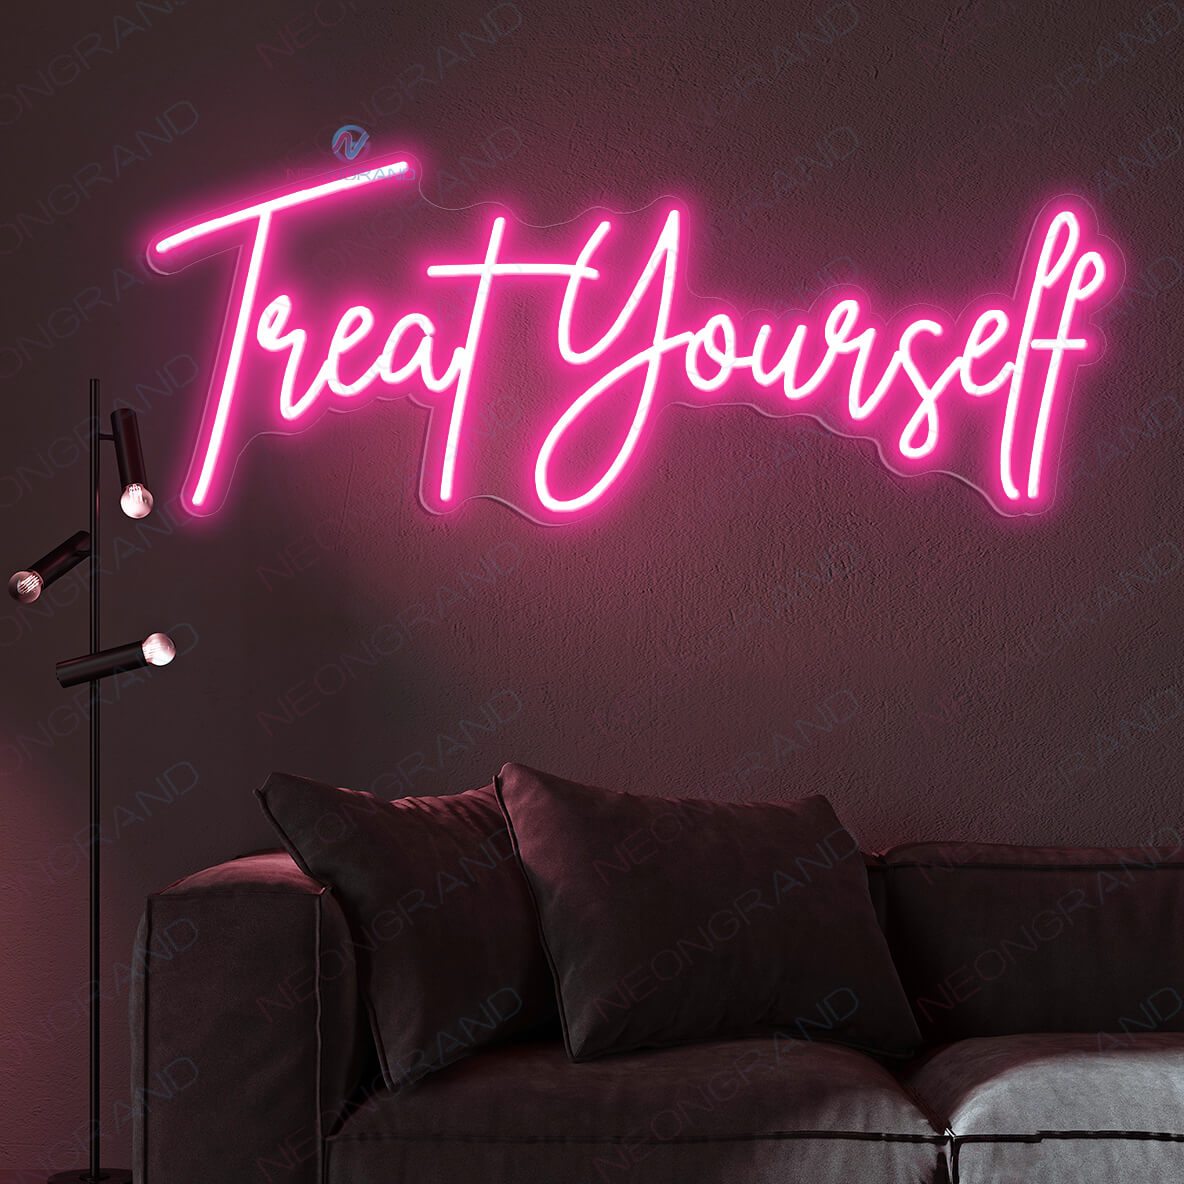 Treat Yourself Neon Sign Motivation Led Light pink